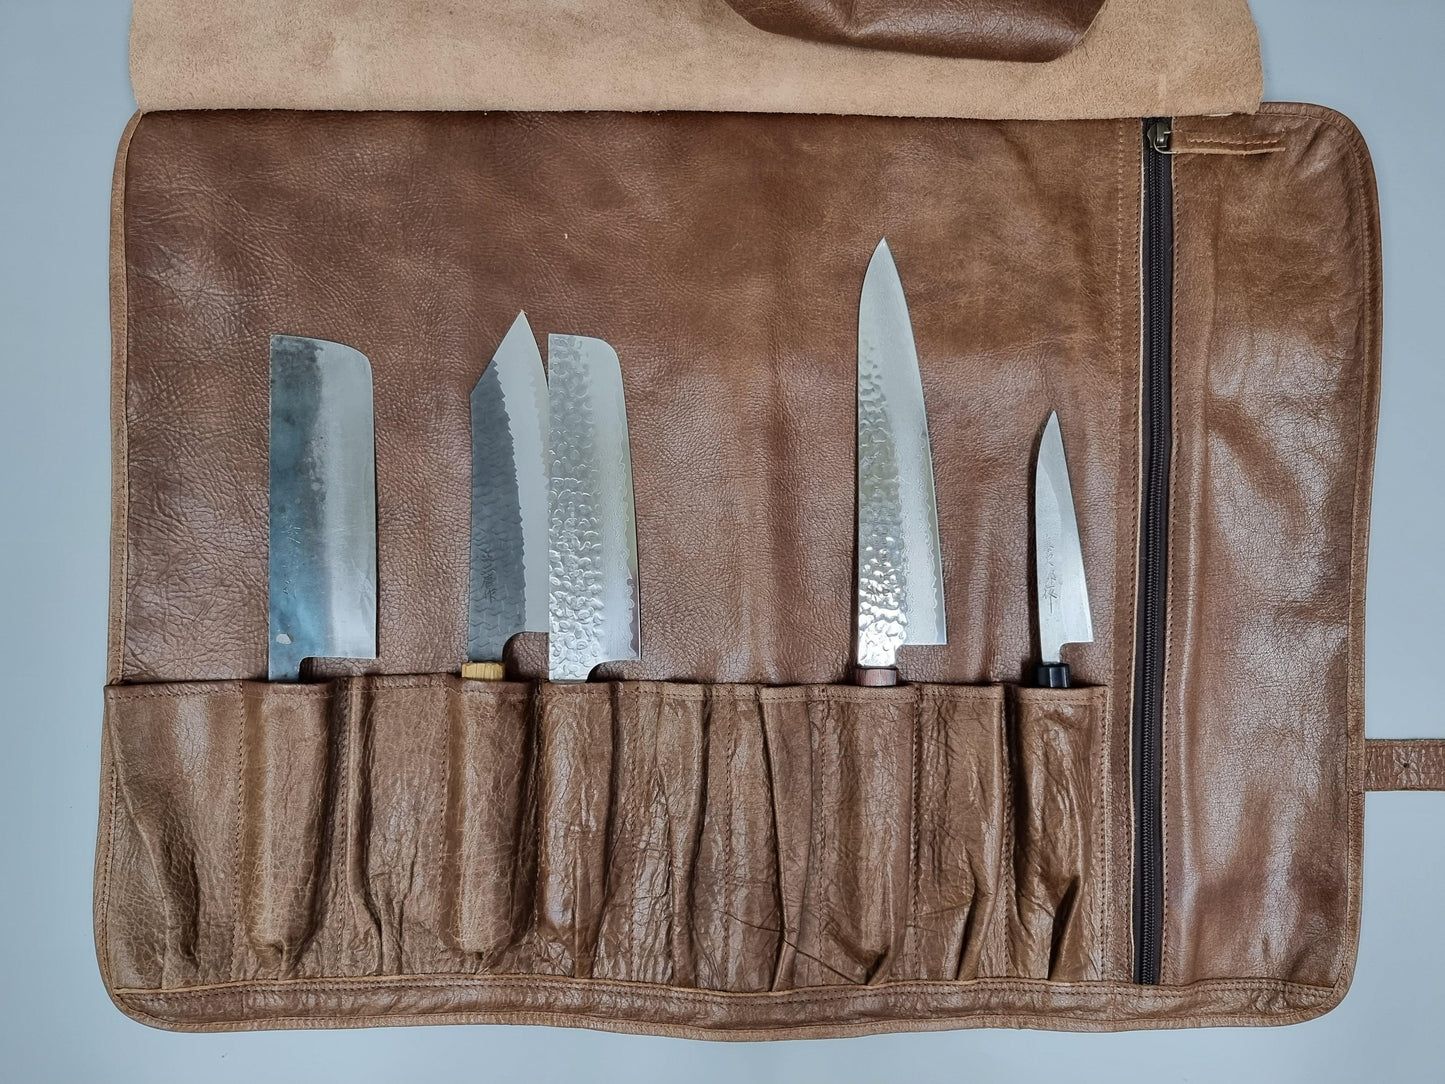 Handmade Leather Knife Roll for 10 Knives - Brown or Black - The Sharp Chef